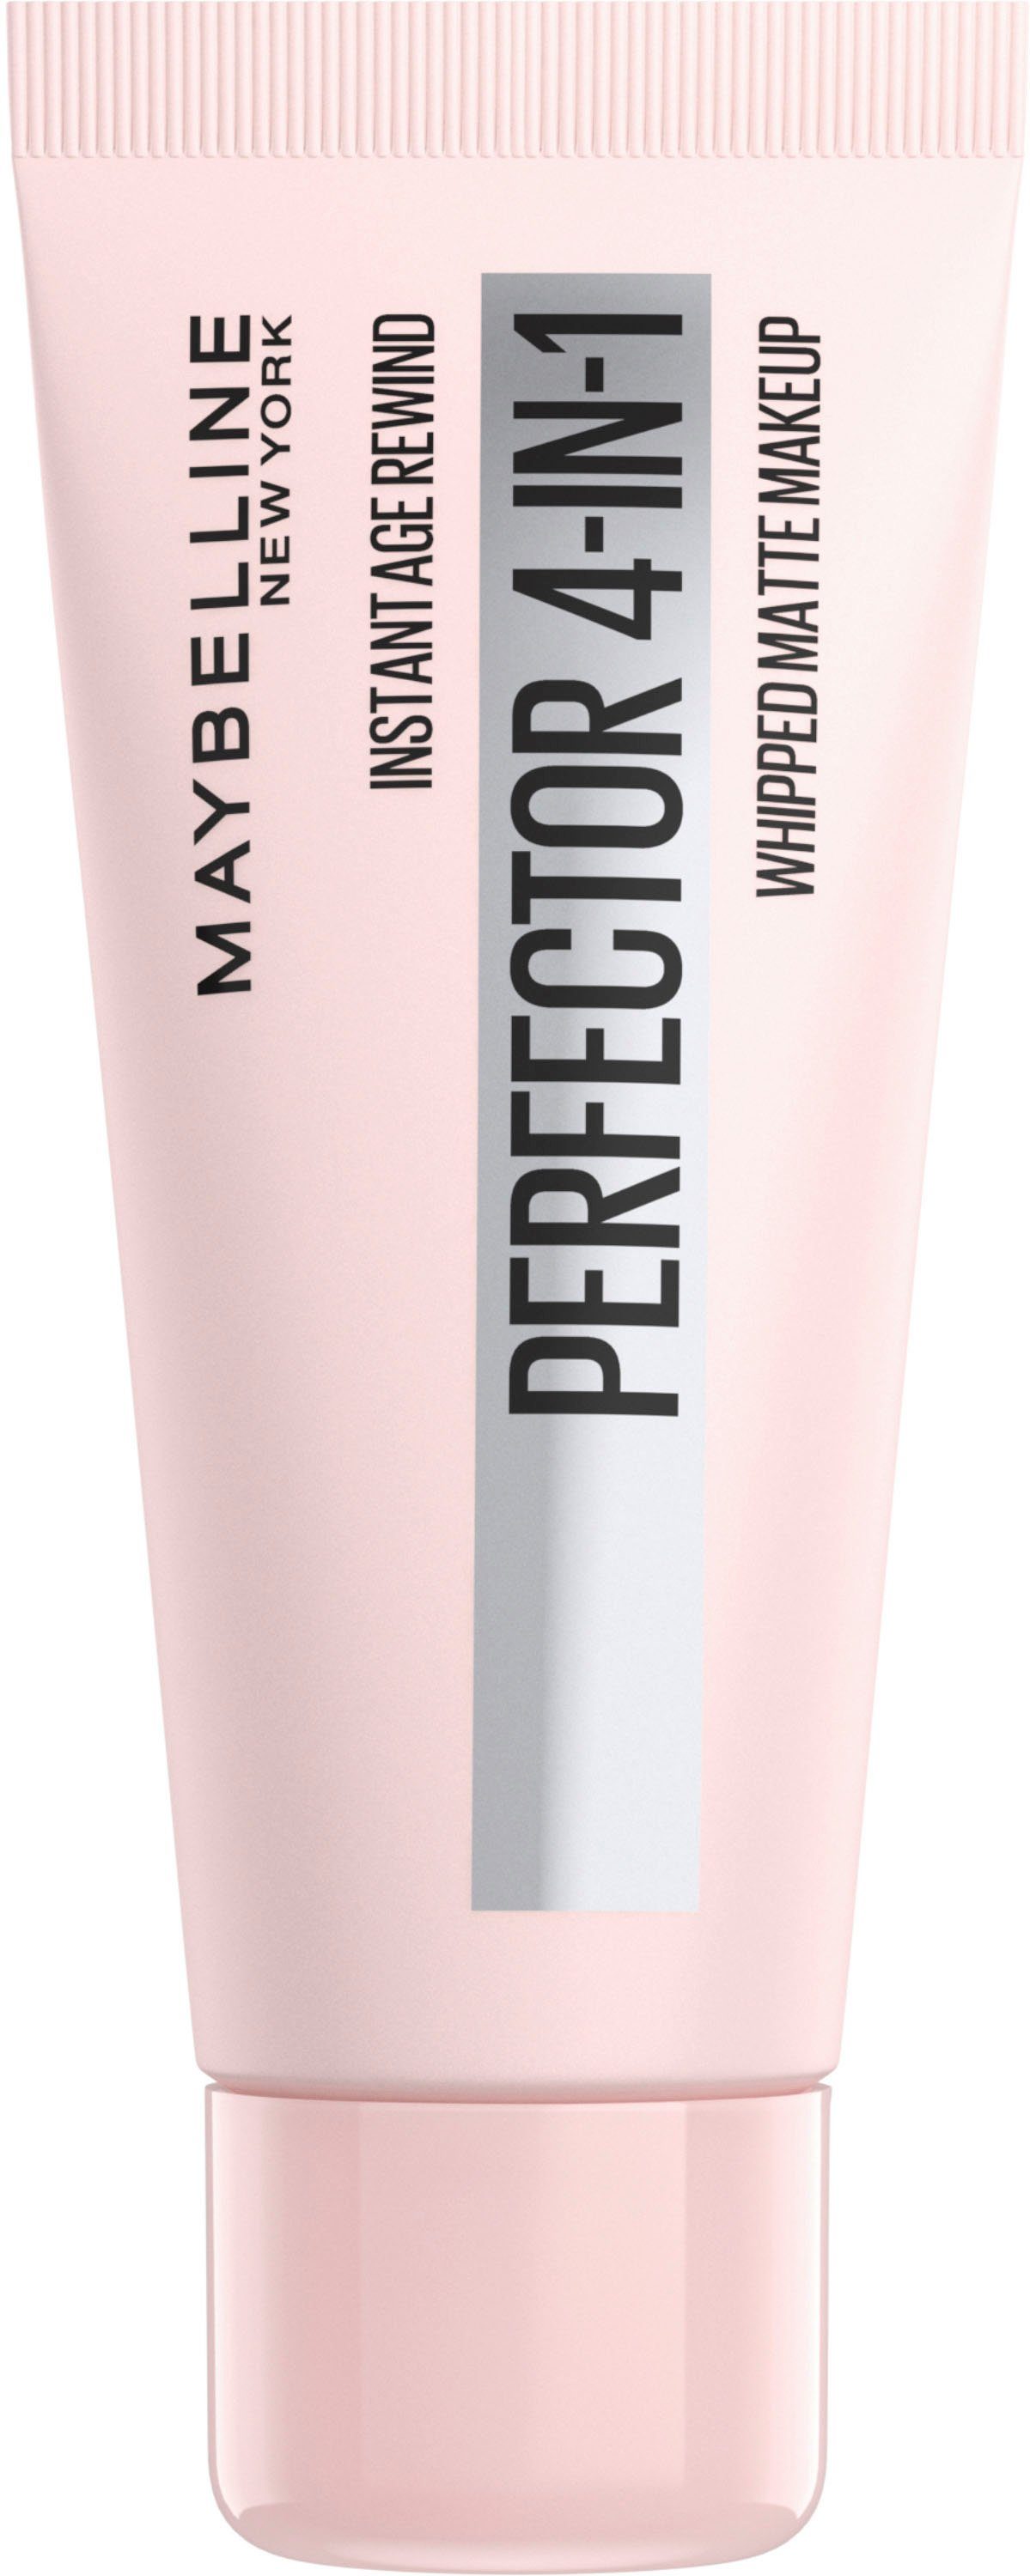 Matte NEW Natural YORK MAYBELLINE 35 Foundation Perfector Instant Medium